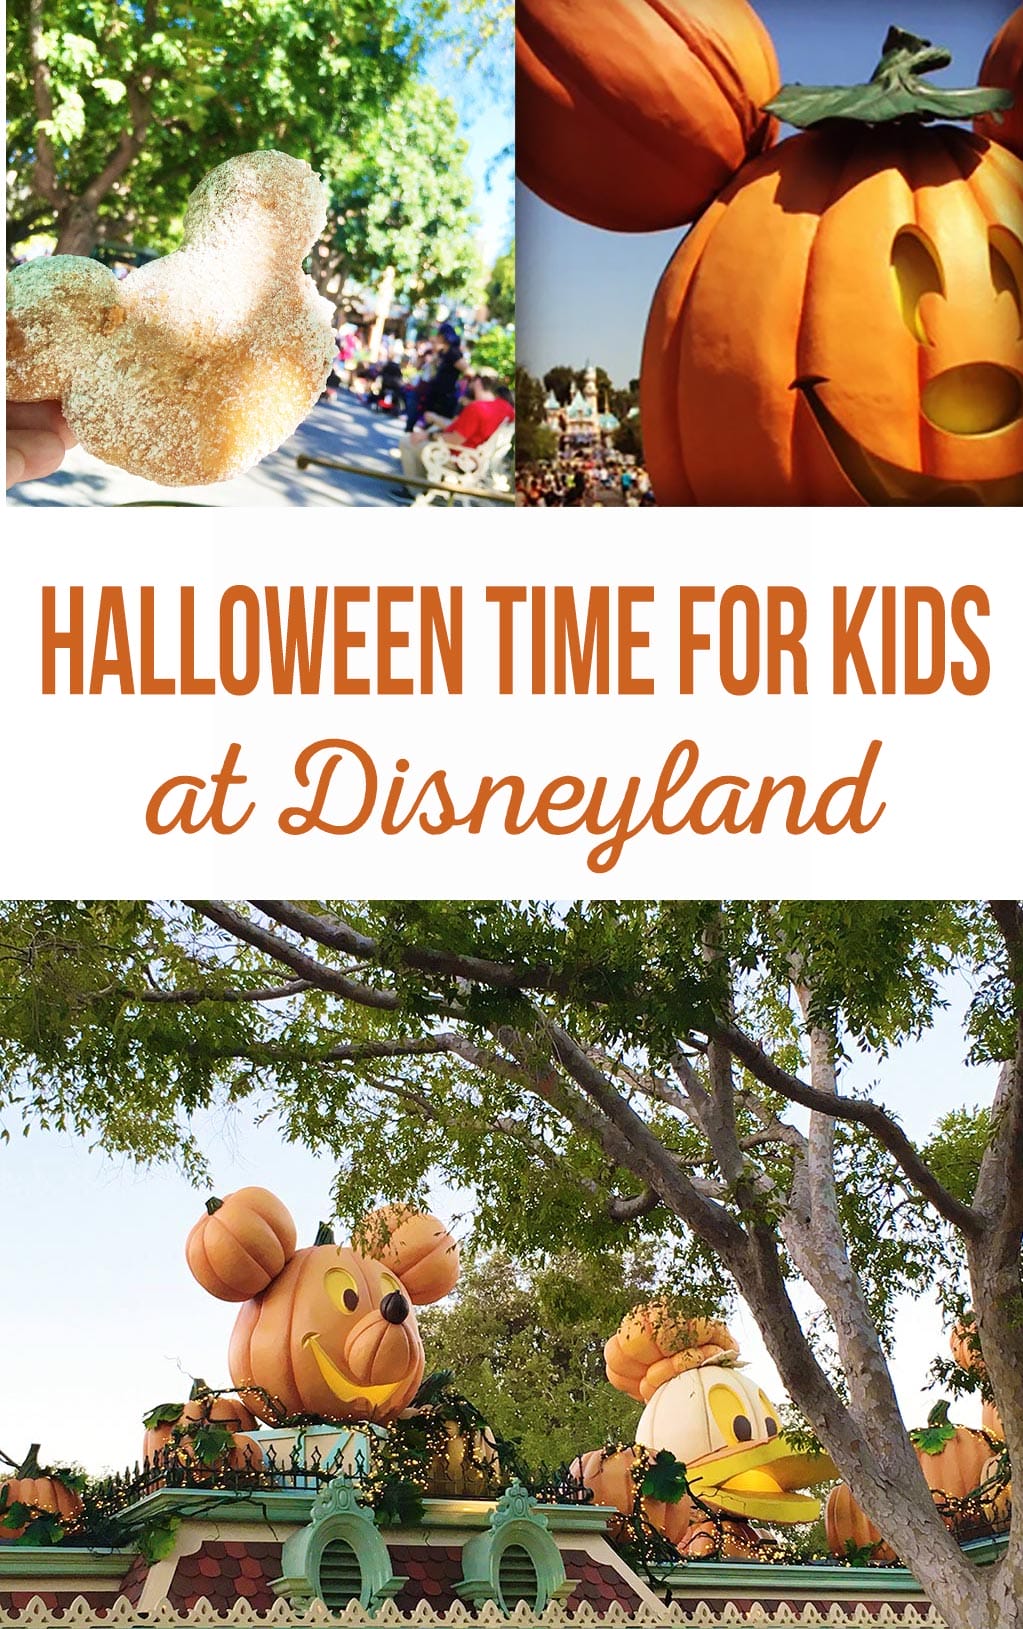 Halloween for Kids at Disneyland | Find out all of the fun at Disneyland Halloween Time for kids. It's the perfect way to celebrate and there's something for everyone.